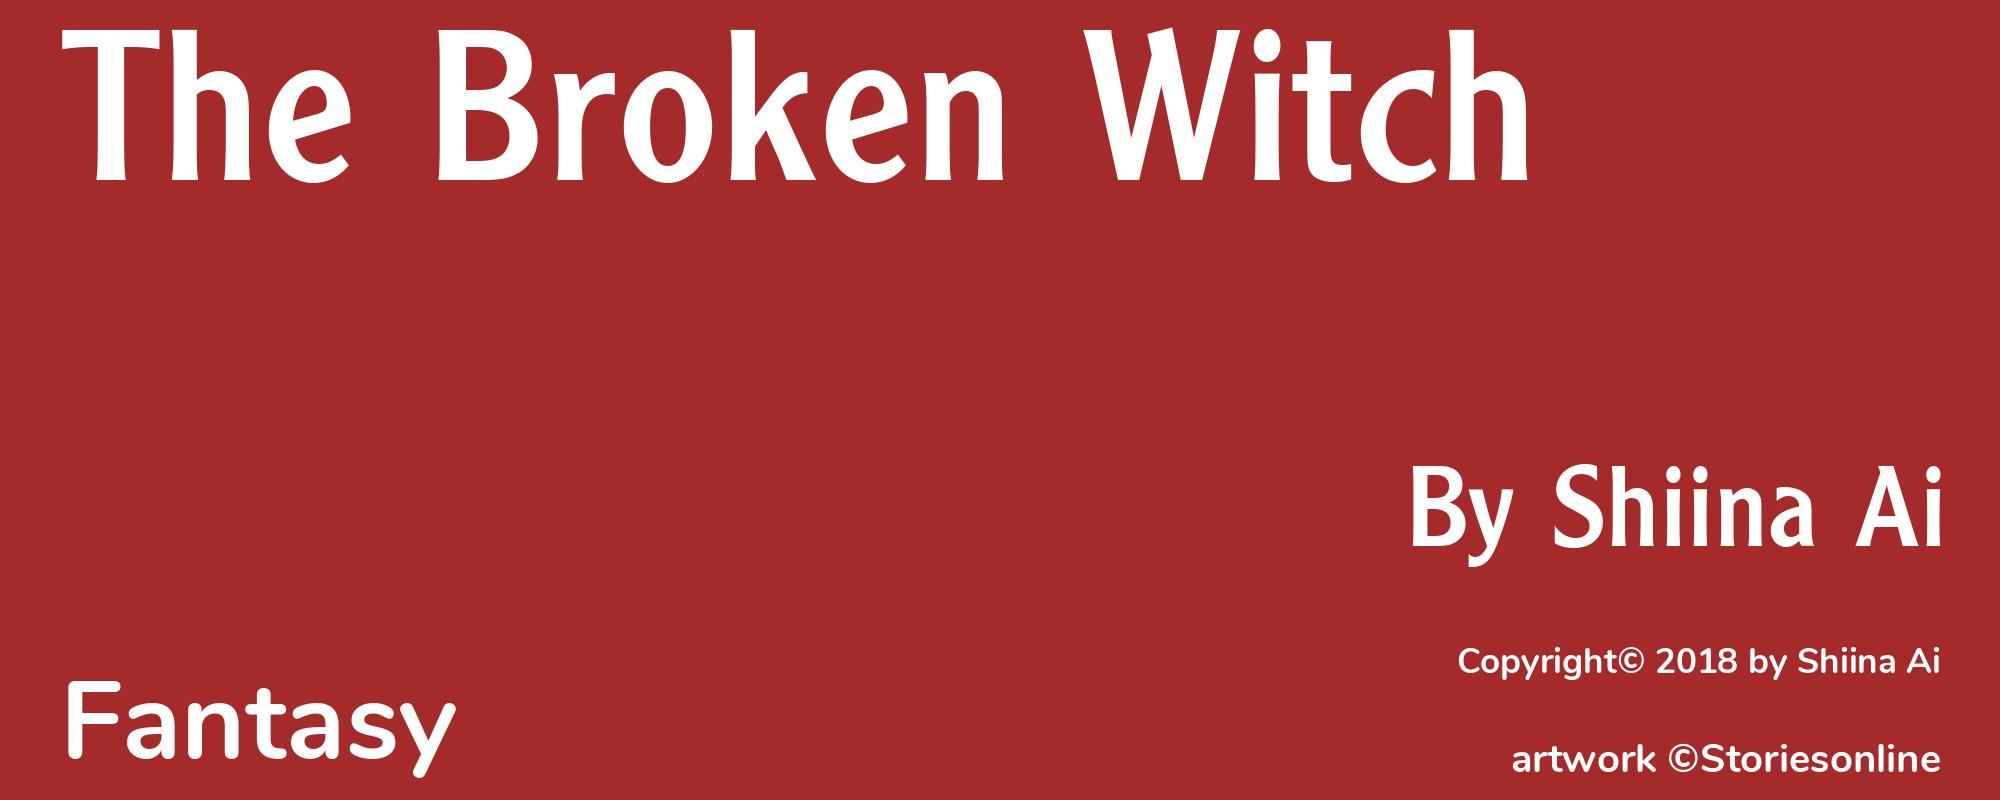 The Broken Witch - Cover